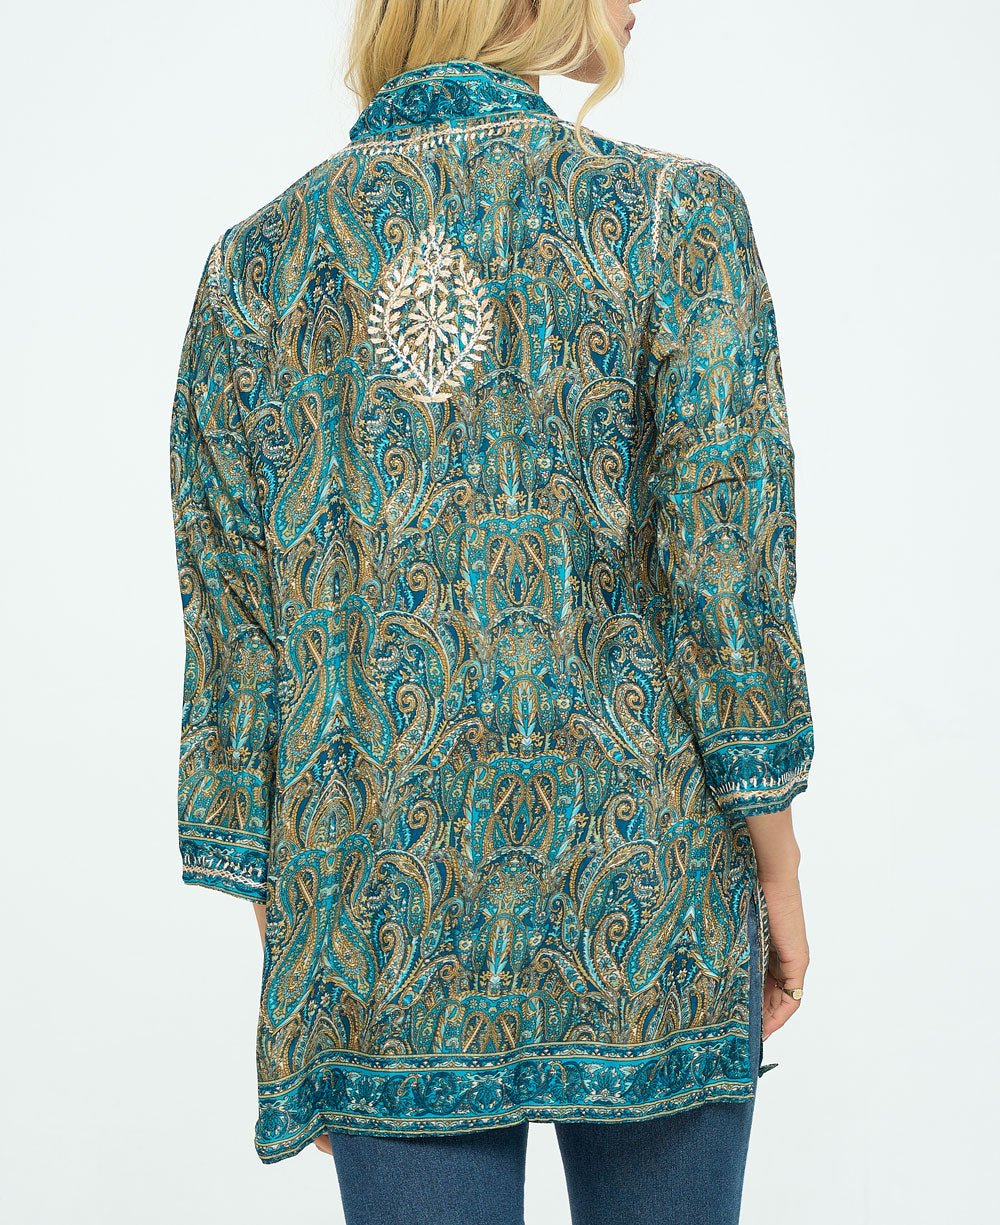 Embroidered Green Gardens V Neck Tunic Top - Shirts & Tops S